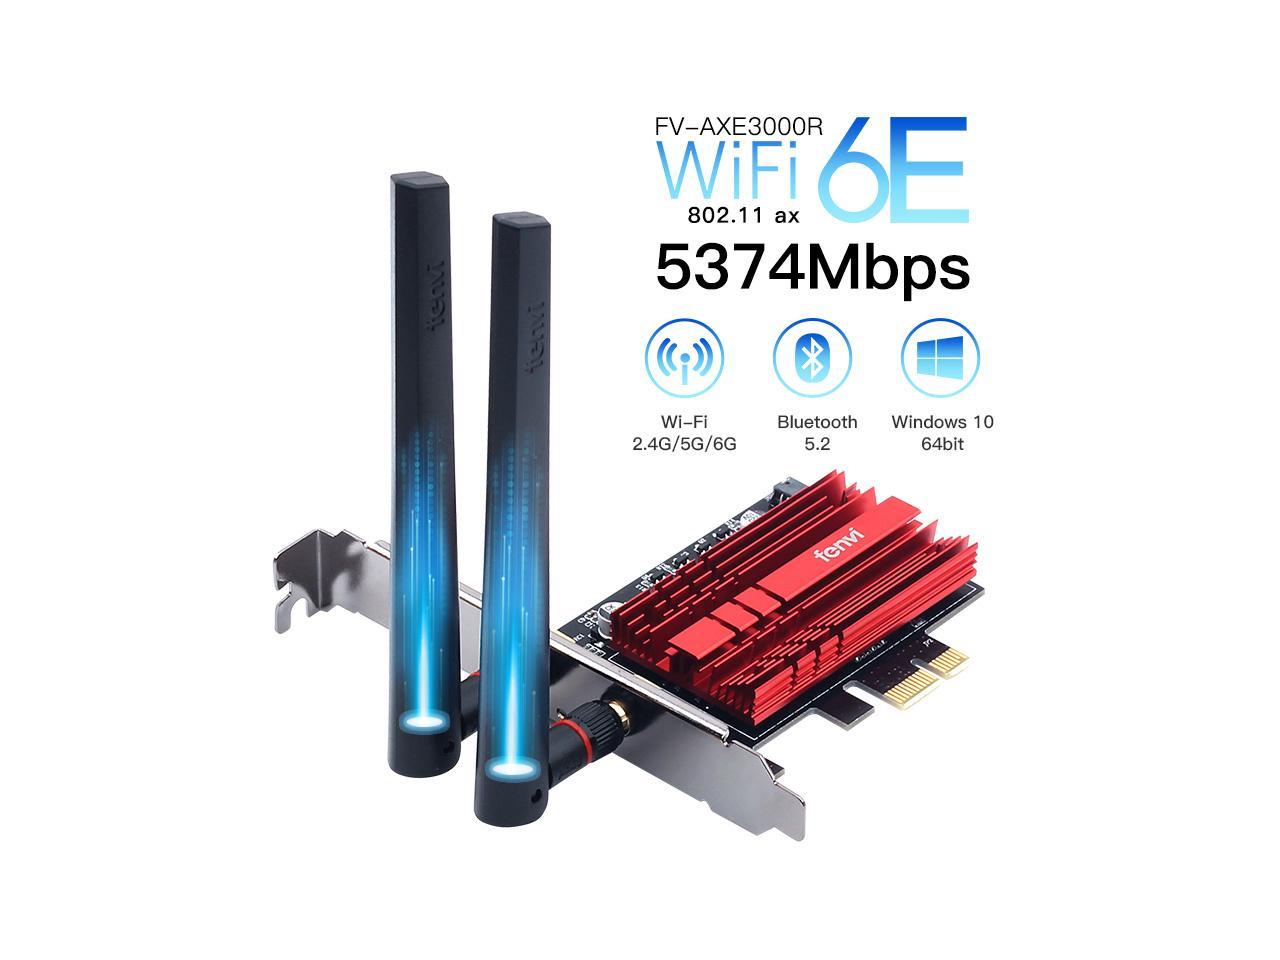 Fenvi FV-AXE3000 Wi-Fi 6E AX210 PCIe Network Card Bluetooth 5.2 Heat Sink AX 3000Mbps 802.11ax Tri-band 2.4G/5G/6G PCI-E Wireless WiFi Network Adapter Cards for Desktop PC Support Windows 10 64-bit